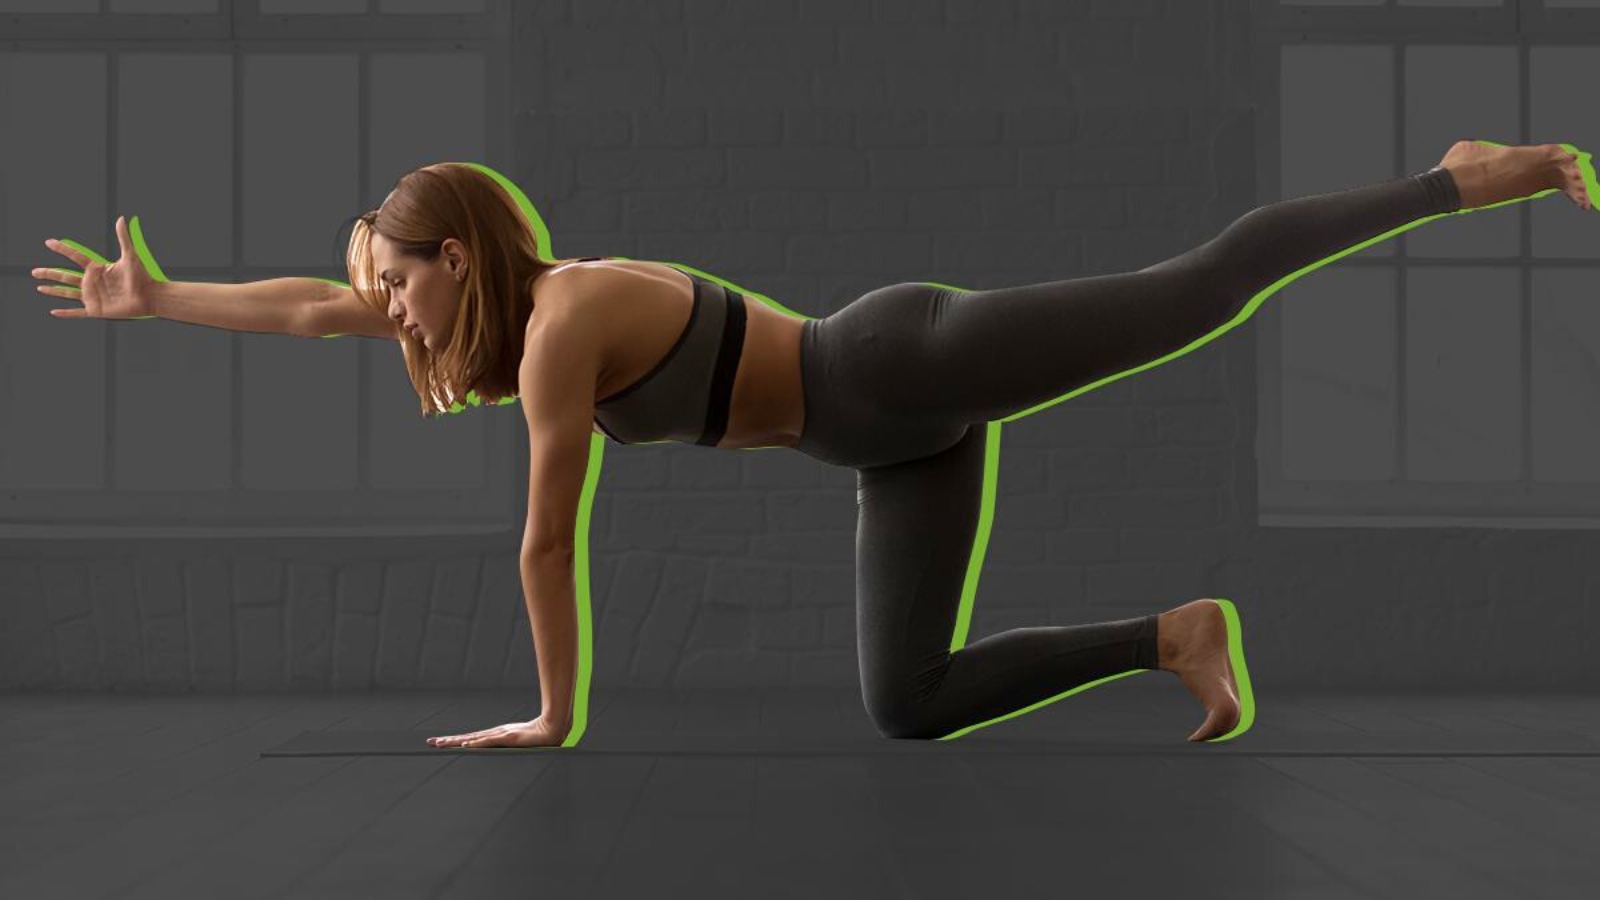 https://barbend.com/wp-content/uploads/2021/12/Barbend-Featured-Image-1600x900-The-10-Best-Lower-Back-Exercises-For-Stability-And-Strength.jpg